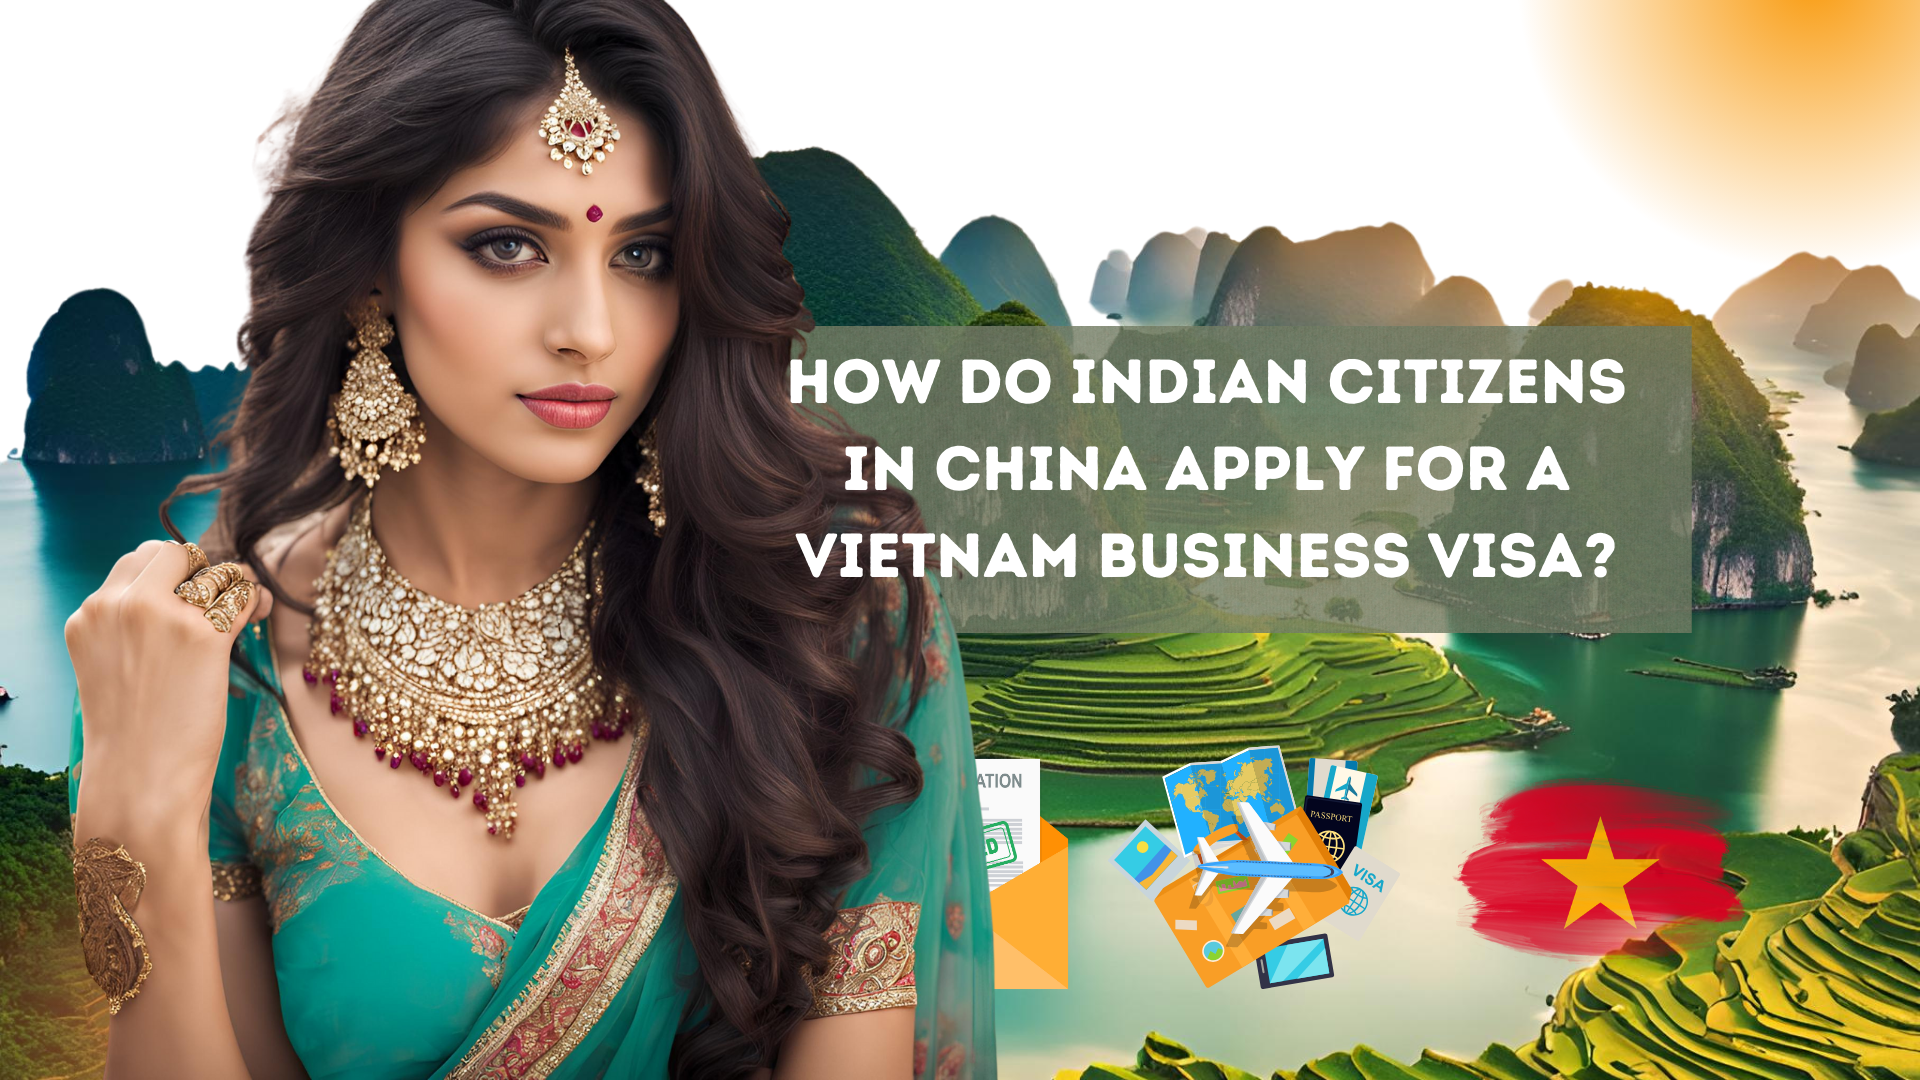 How do Indian citizens in China apply for a Vietnam business visa?